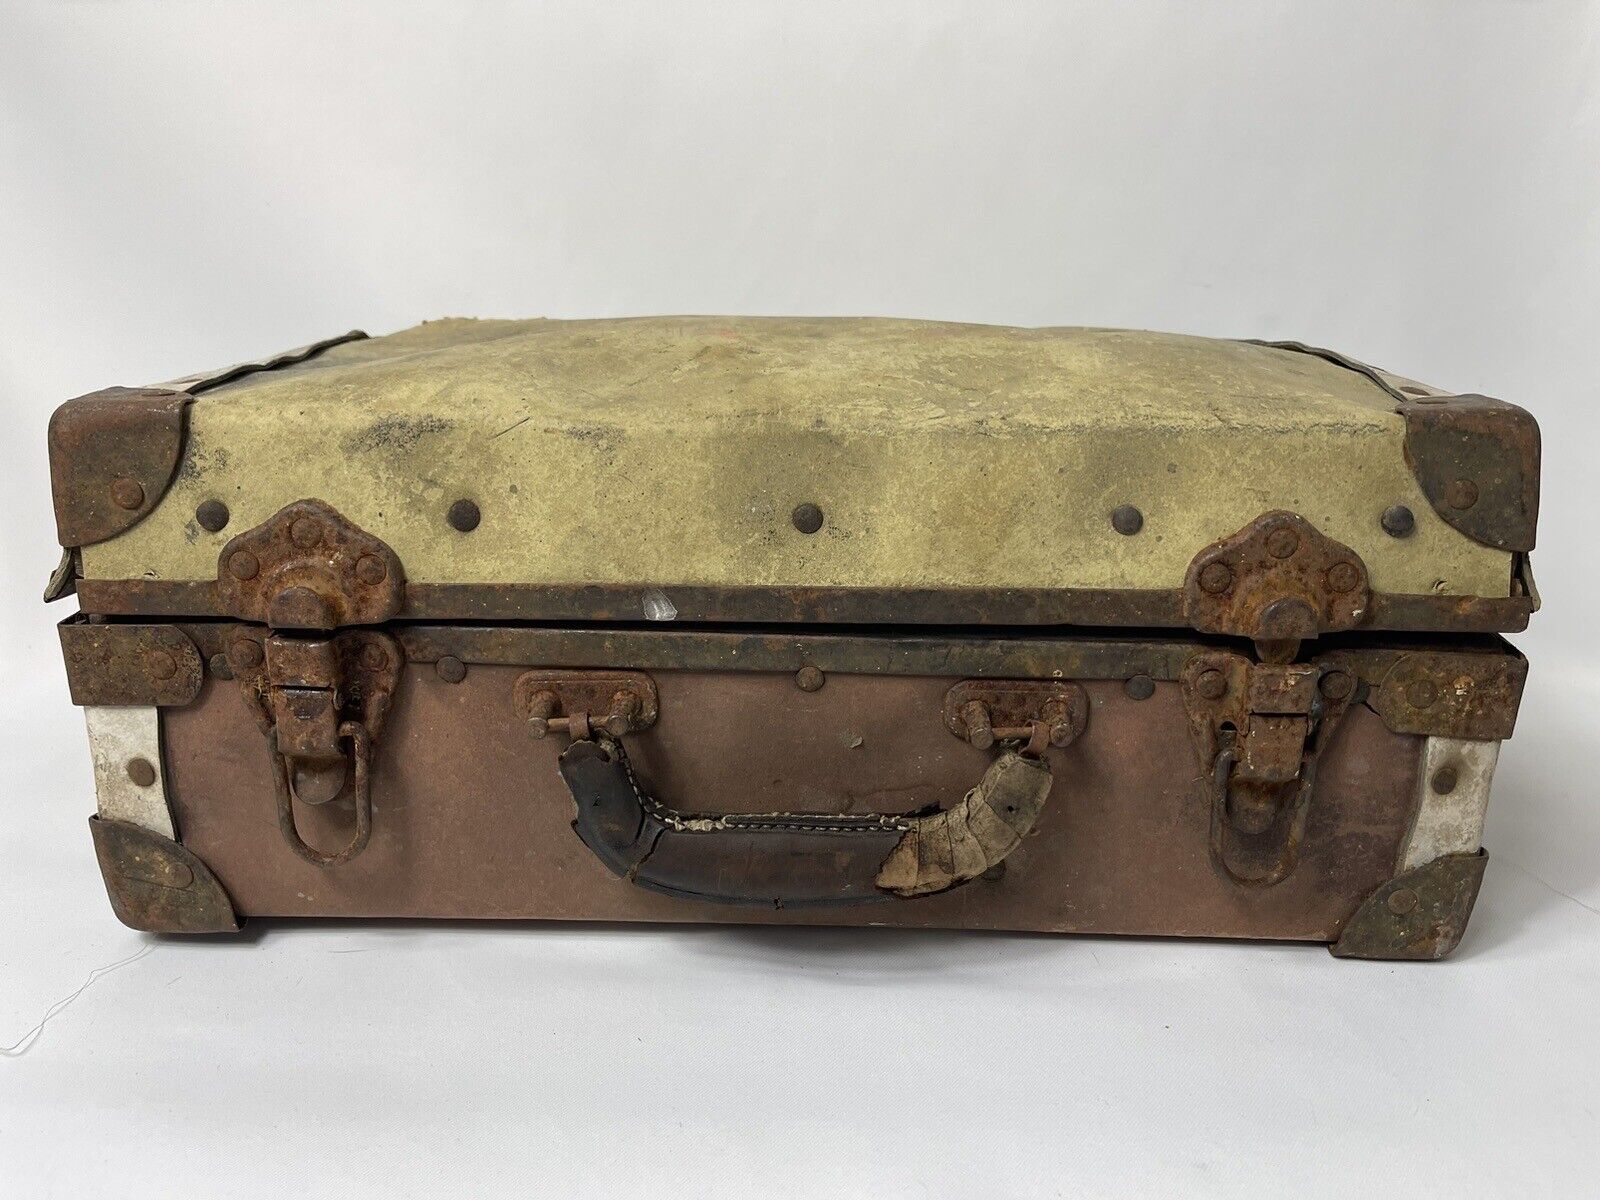 ANTIQUE WILLIAM BAL CORPORATION LEATHER TOOL BOX LATE 1800S/EARLY 1900S